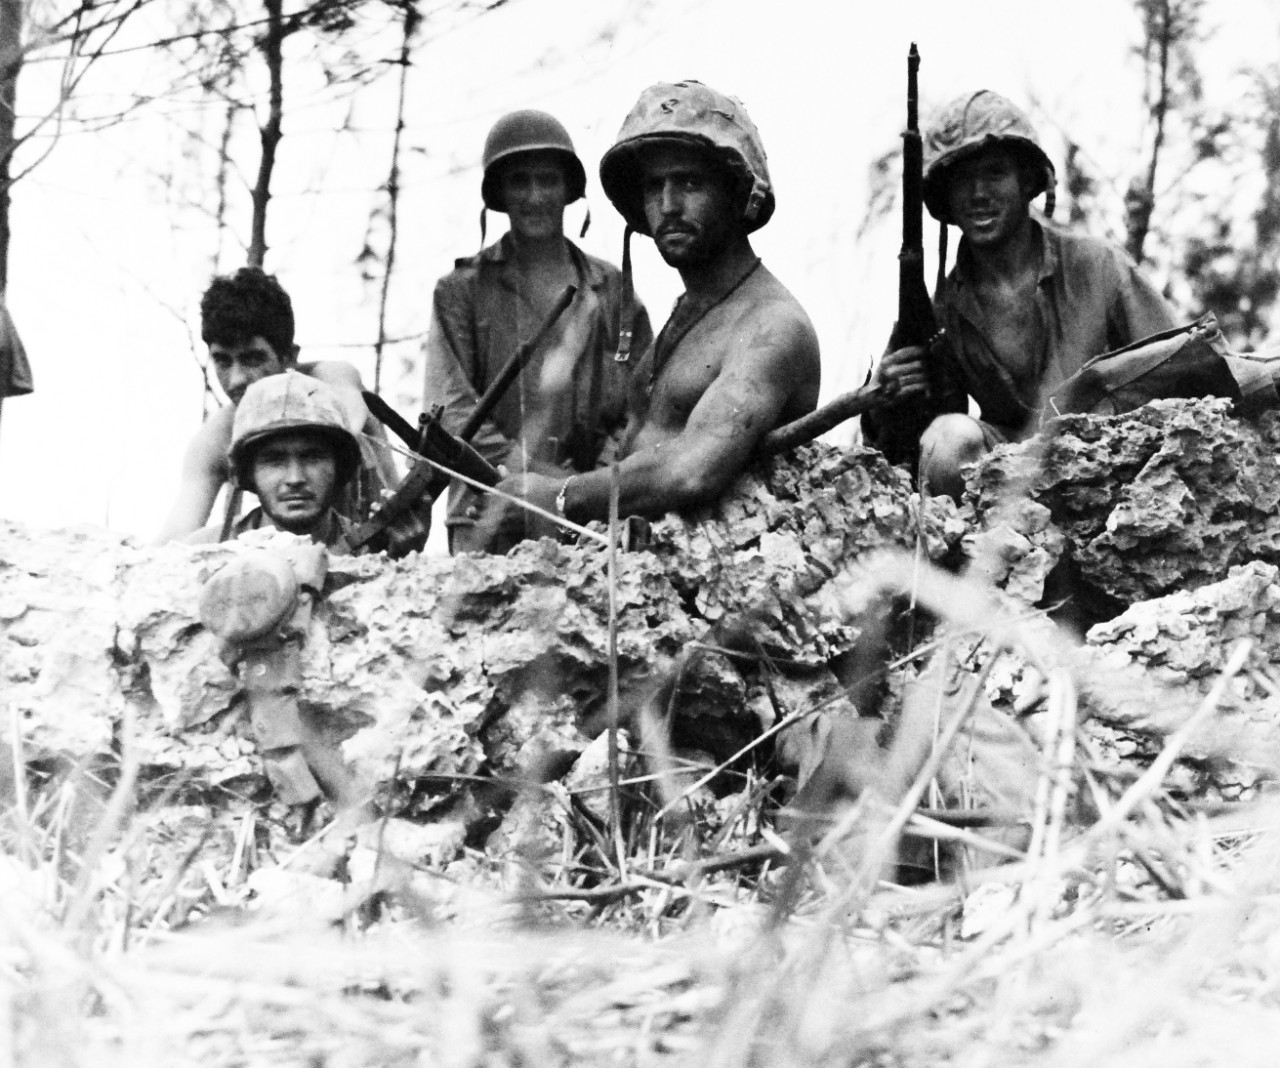 80-G-287156:   Invasion of Saipan, June-July 1944.   U.S. Marines in foxhole near front lines on Saipan July 1, 1944.   Photographed by USS Indianapolis (CA 35) photographer.   Official U.S. Navy photograph, now in the collections of the National Archives.  (2017/03/21).  